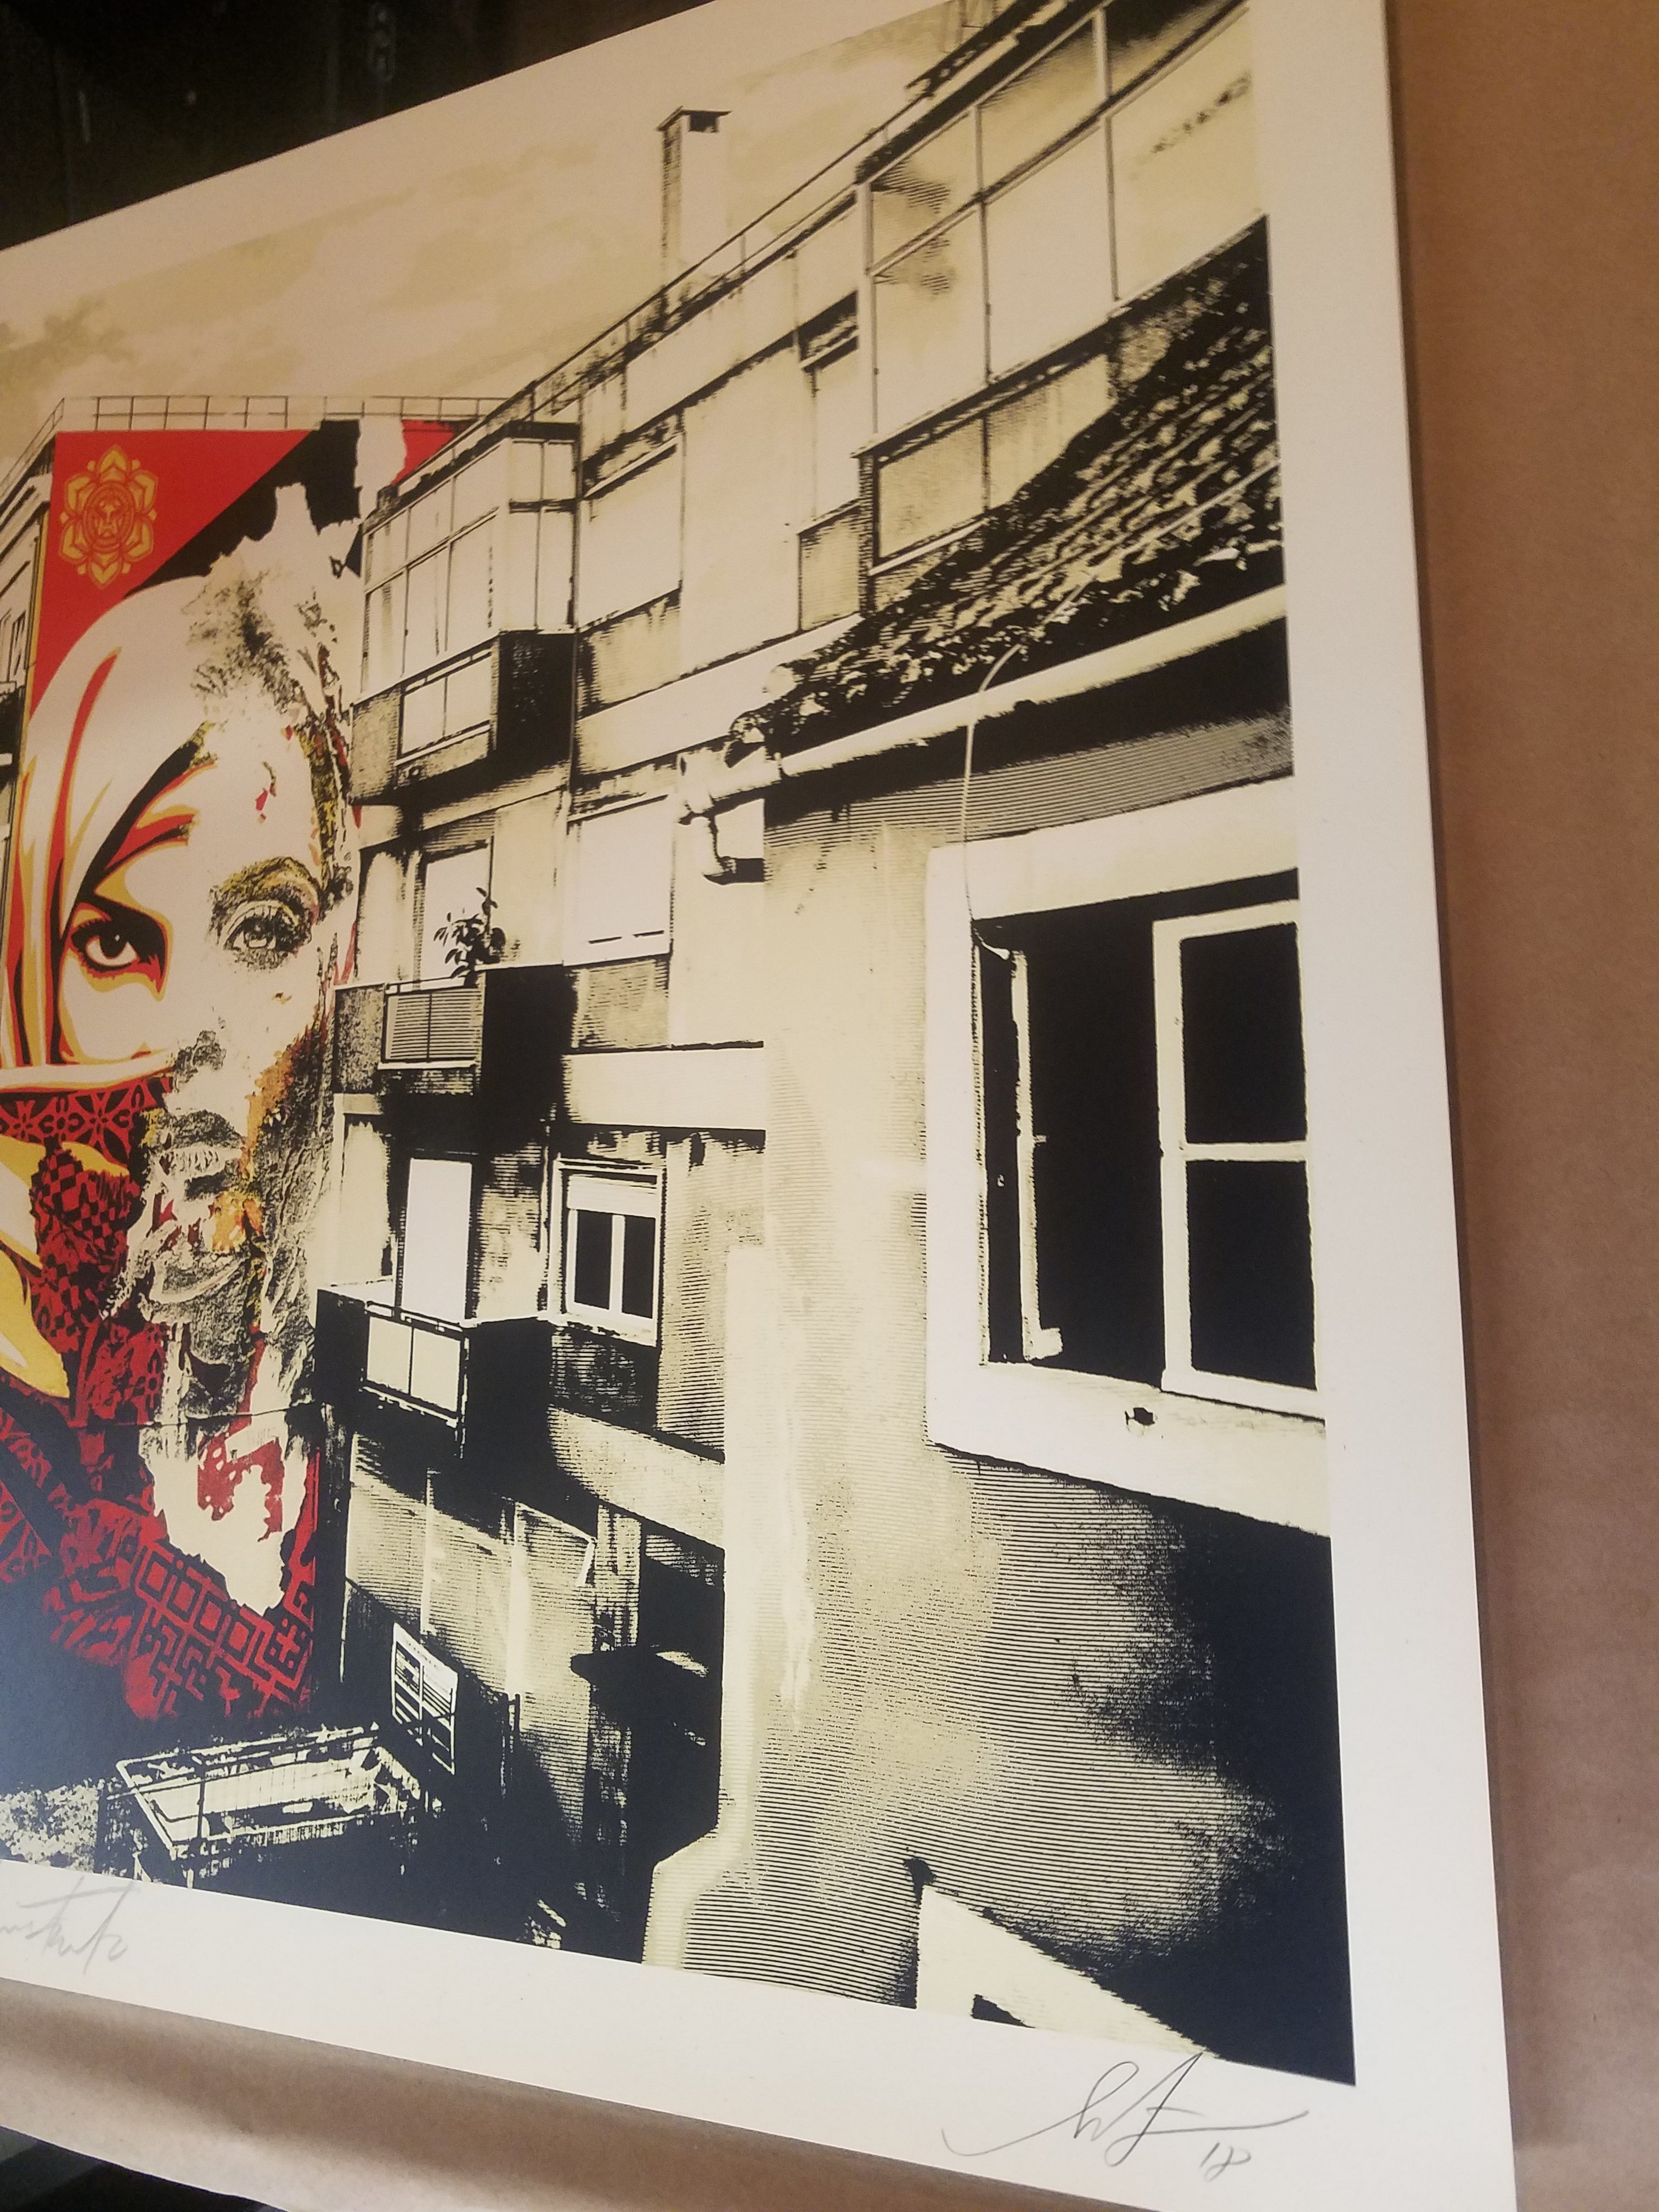 Title:  Universal Personhood Lisbon  Artist:  Shepard Fairey  Edition:  AP edition, signed and numbered by Vhils and Shepard Fairey  Type:  Screen print  Size:  24" x 30"  Notes:  Printed on on cream Speckletone paper.  Check out our other listings for more hard-to-find and out-of-print posters.